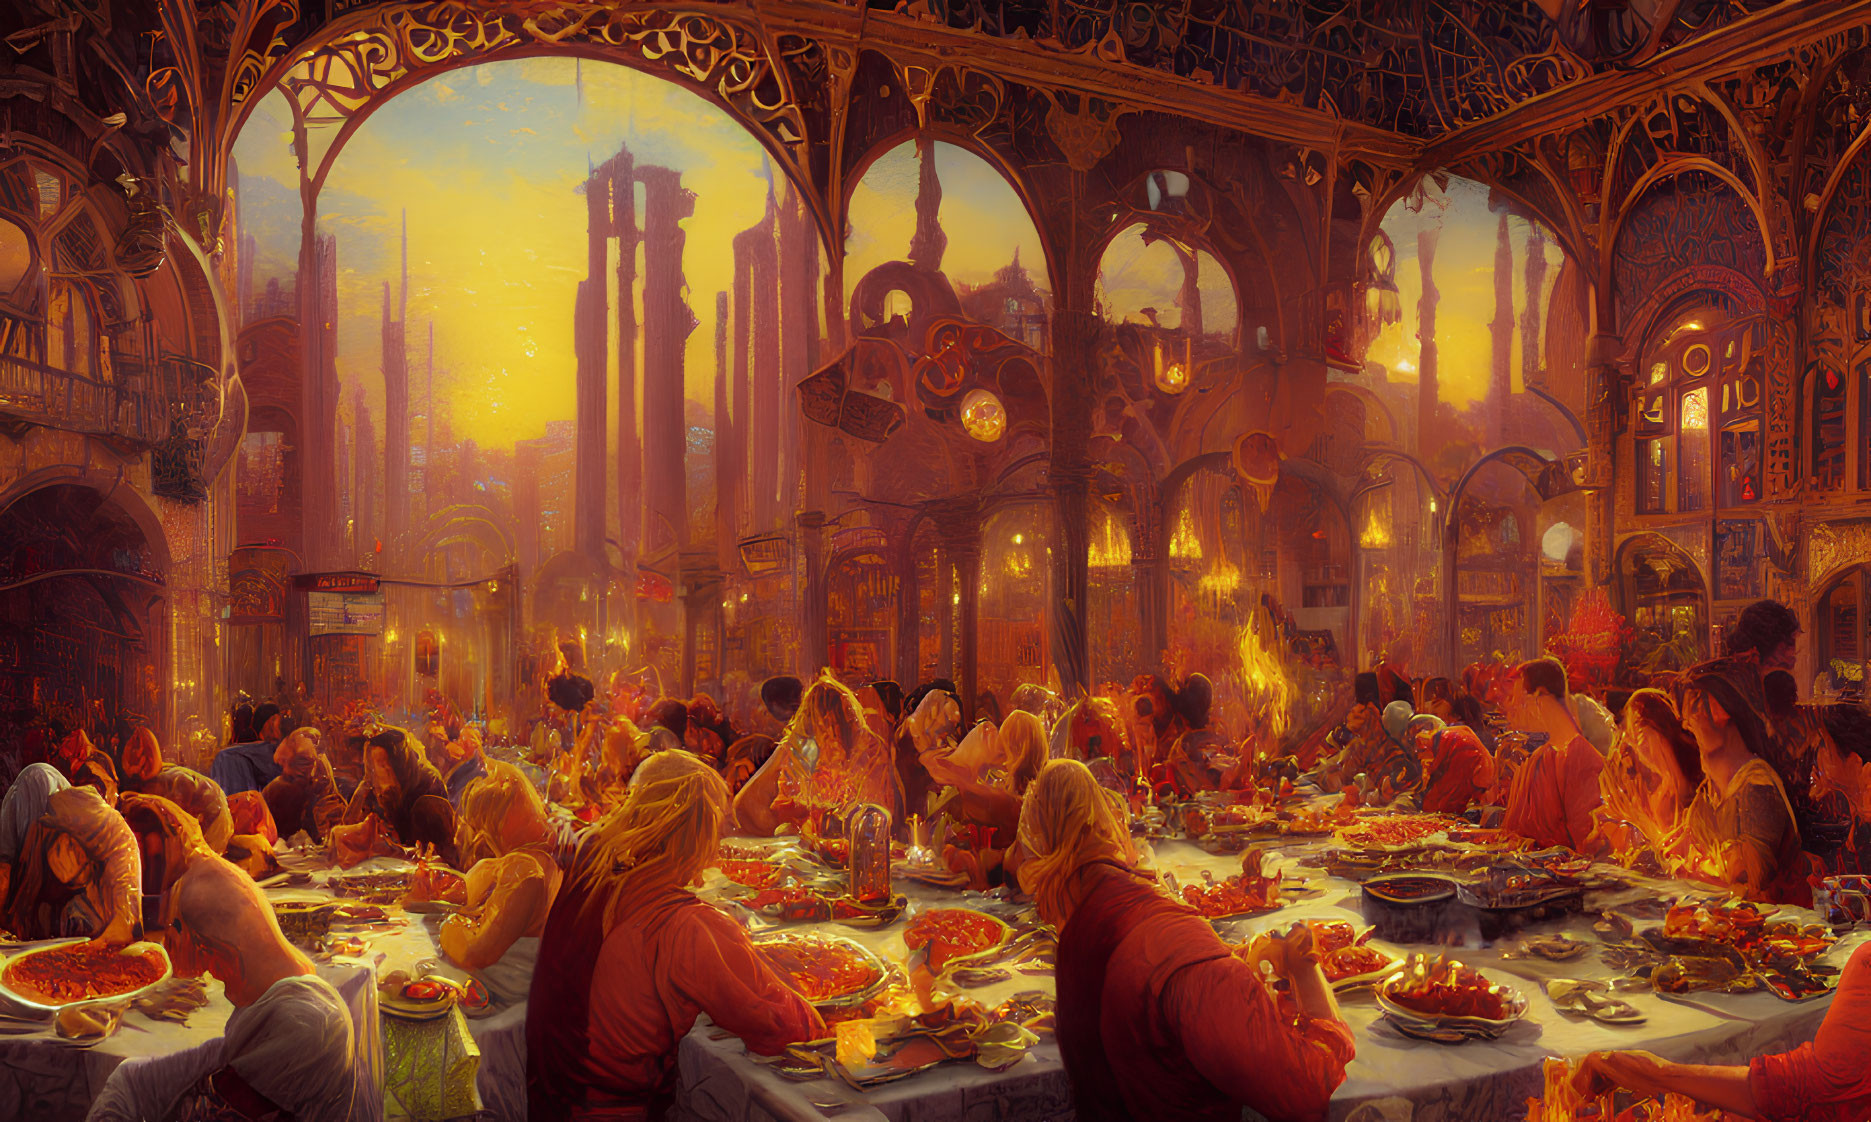 Medieval banquet in grand hall with Gothic arches and warm golden light